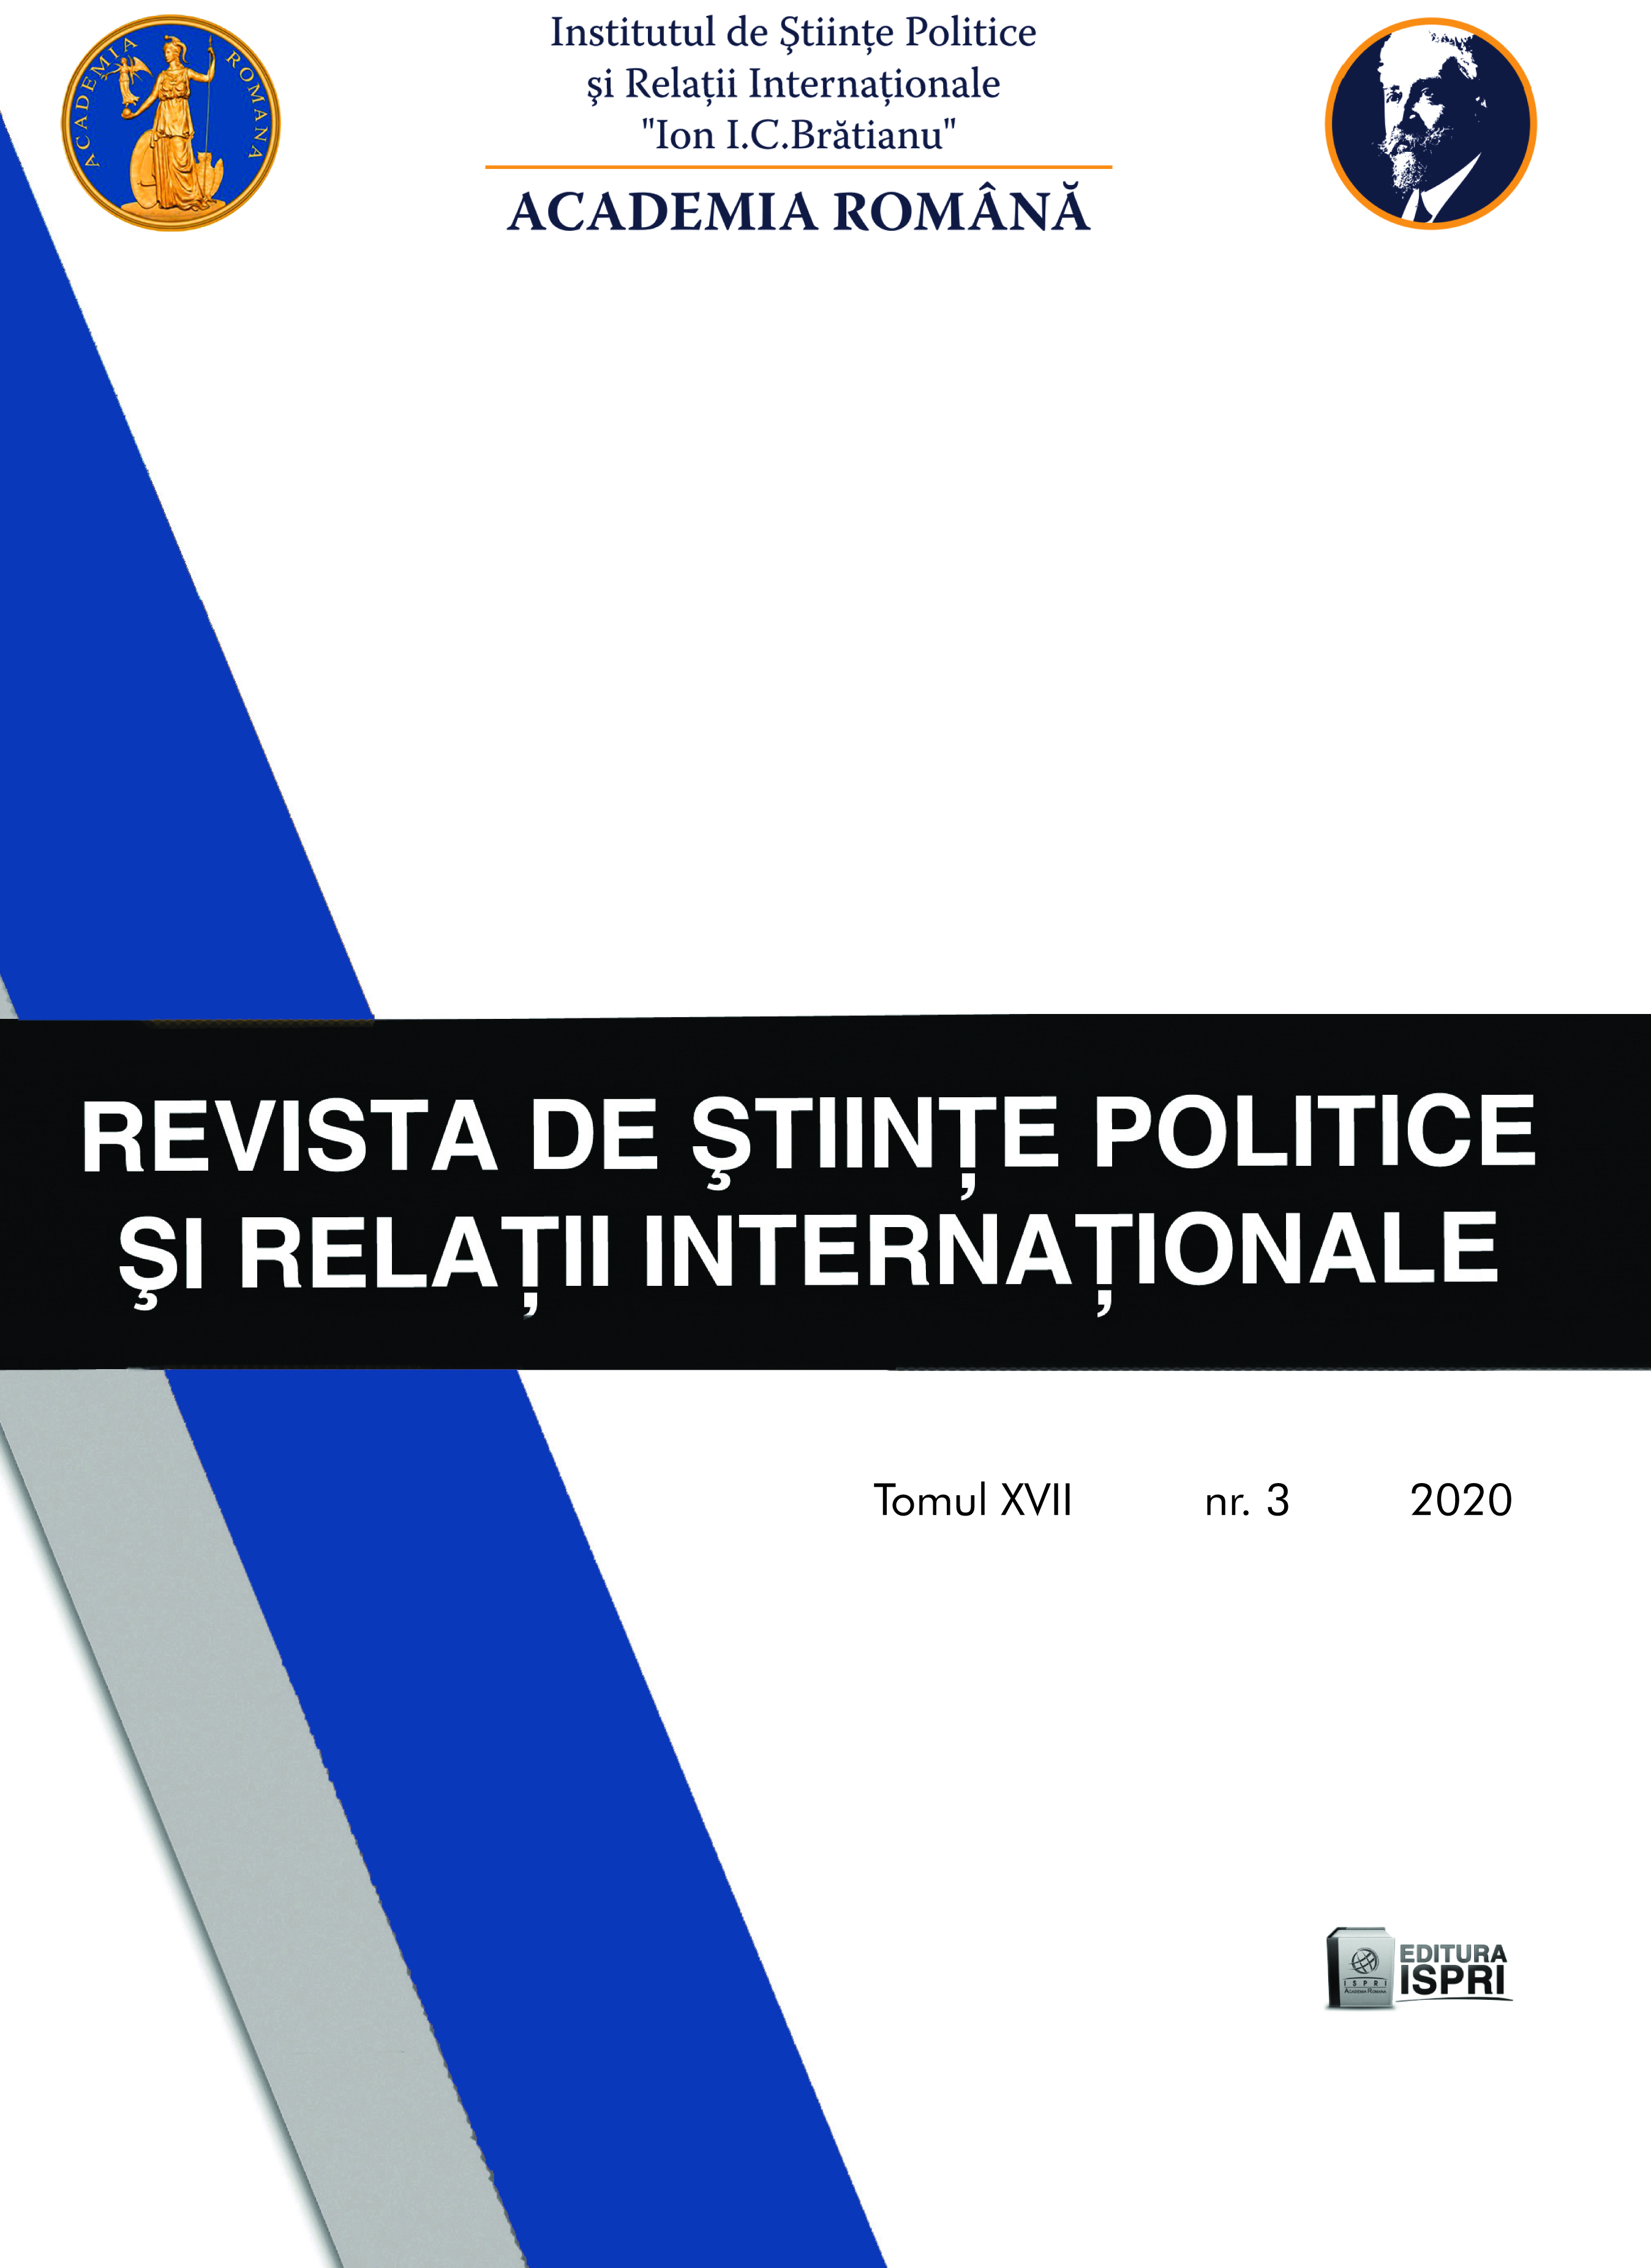 POLITICS AND THE PRINCIPLE OF NATIONALITY IN TRANSYLVANIA BEFORE THE GREAT UNION (II) Cover Image